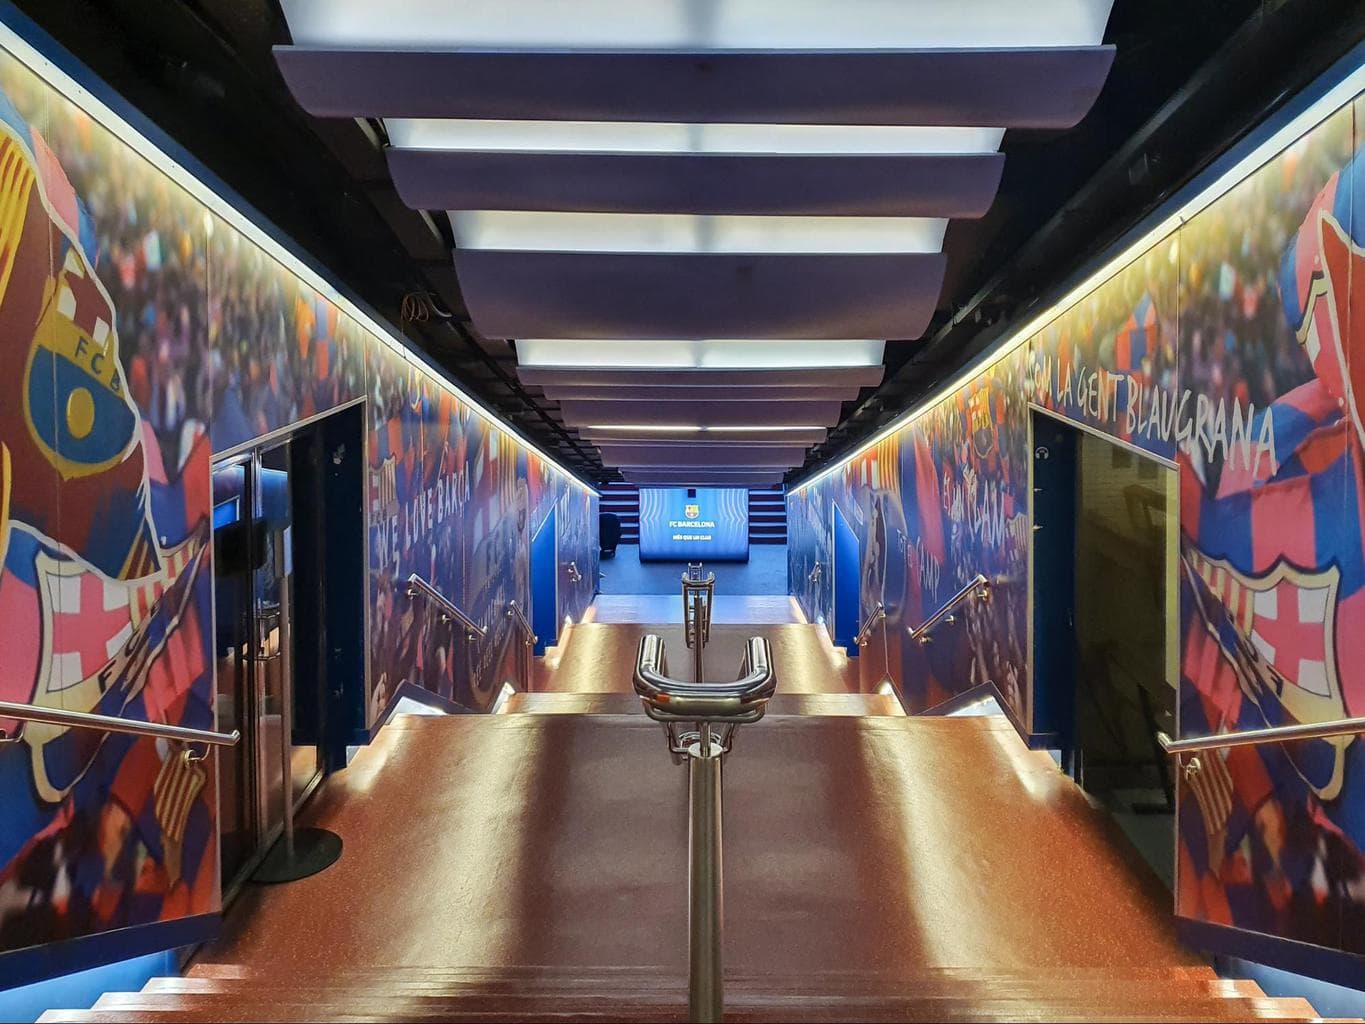 The player’s corridor to access the field at Camp Nou